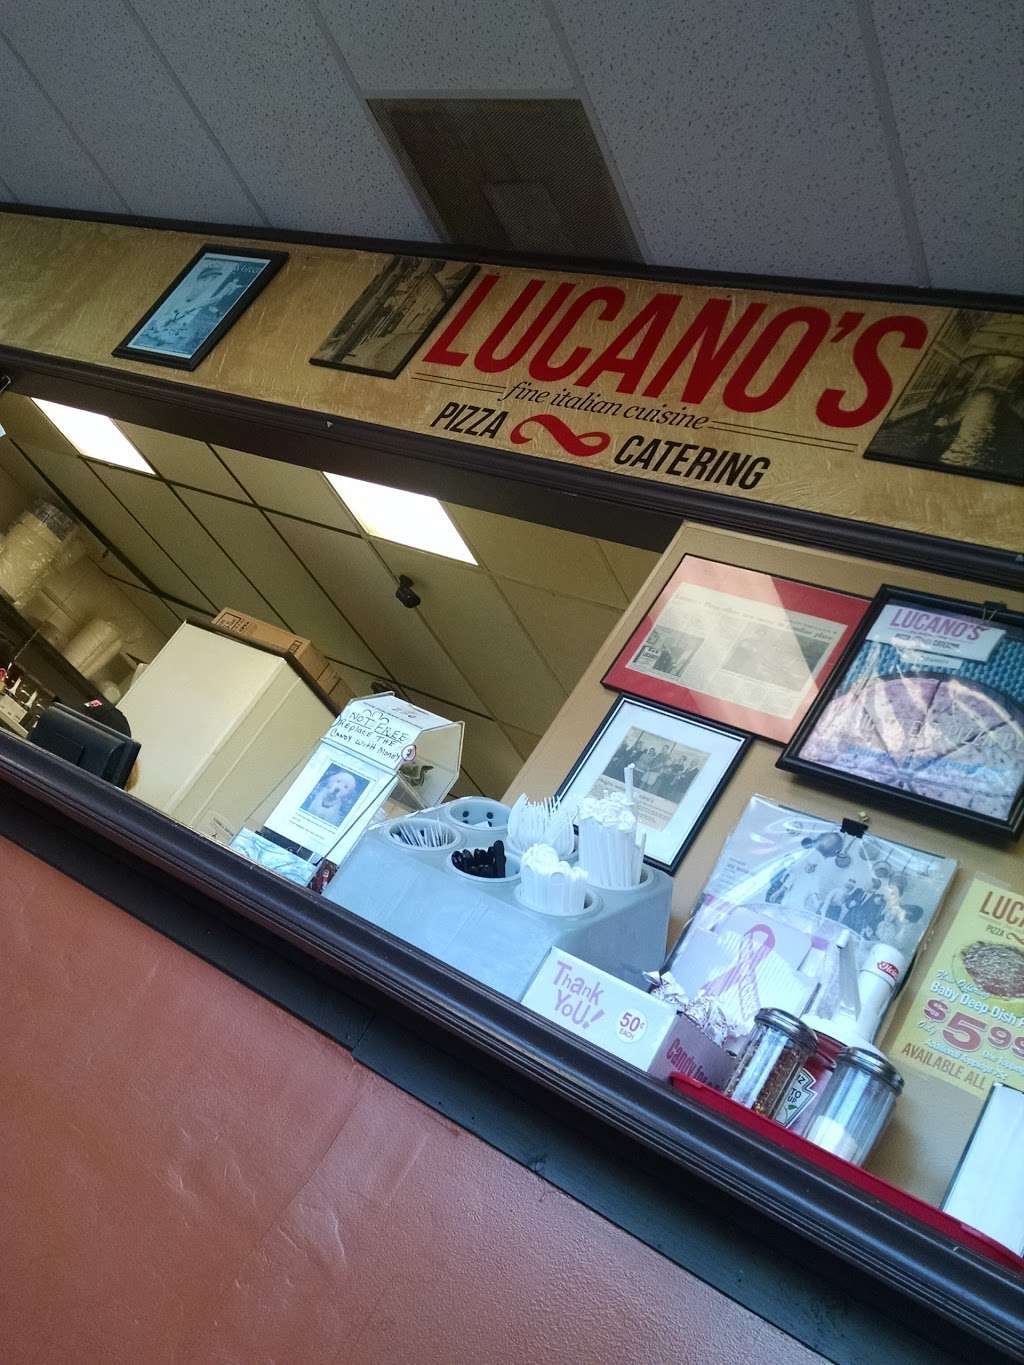 Lucano’s Pizza & Catering | 12778 S Harlem Ave, Palos Heights, IL 60463 | Phone: (708) 361-3330